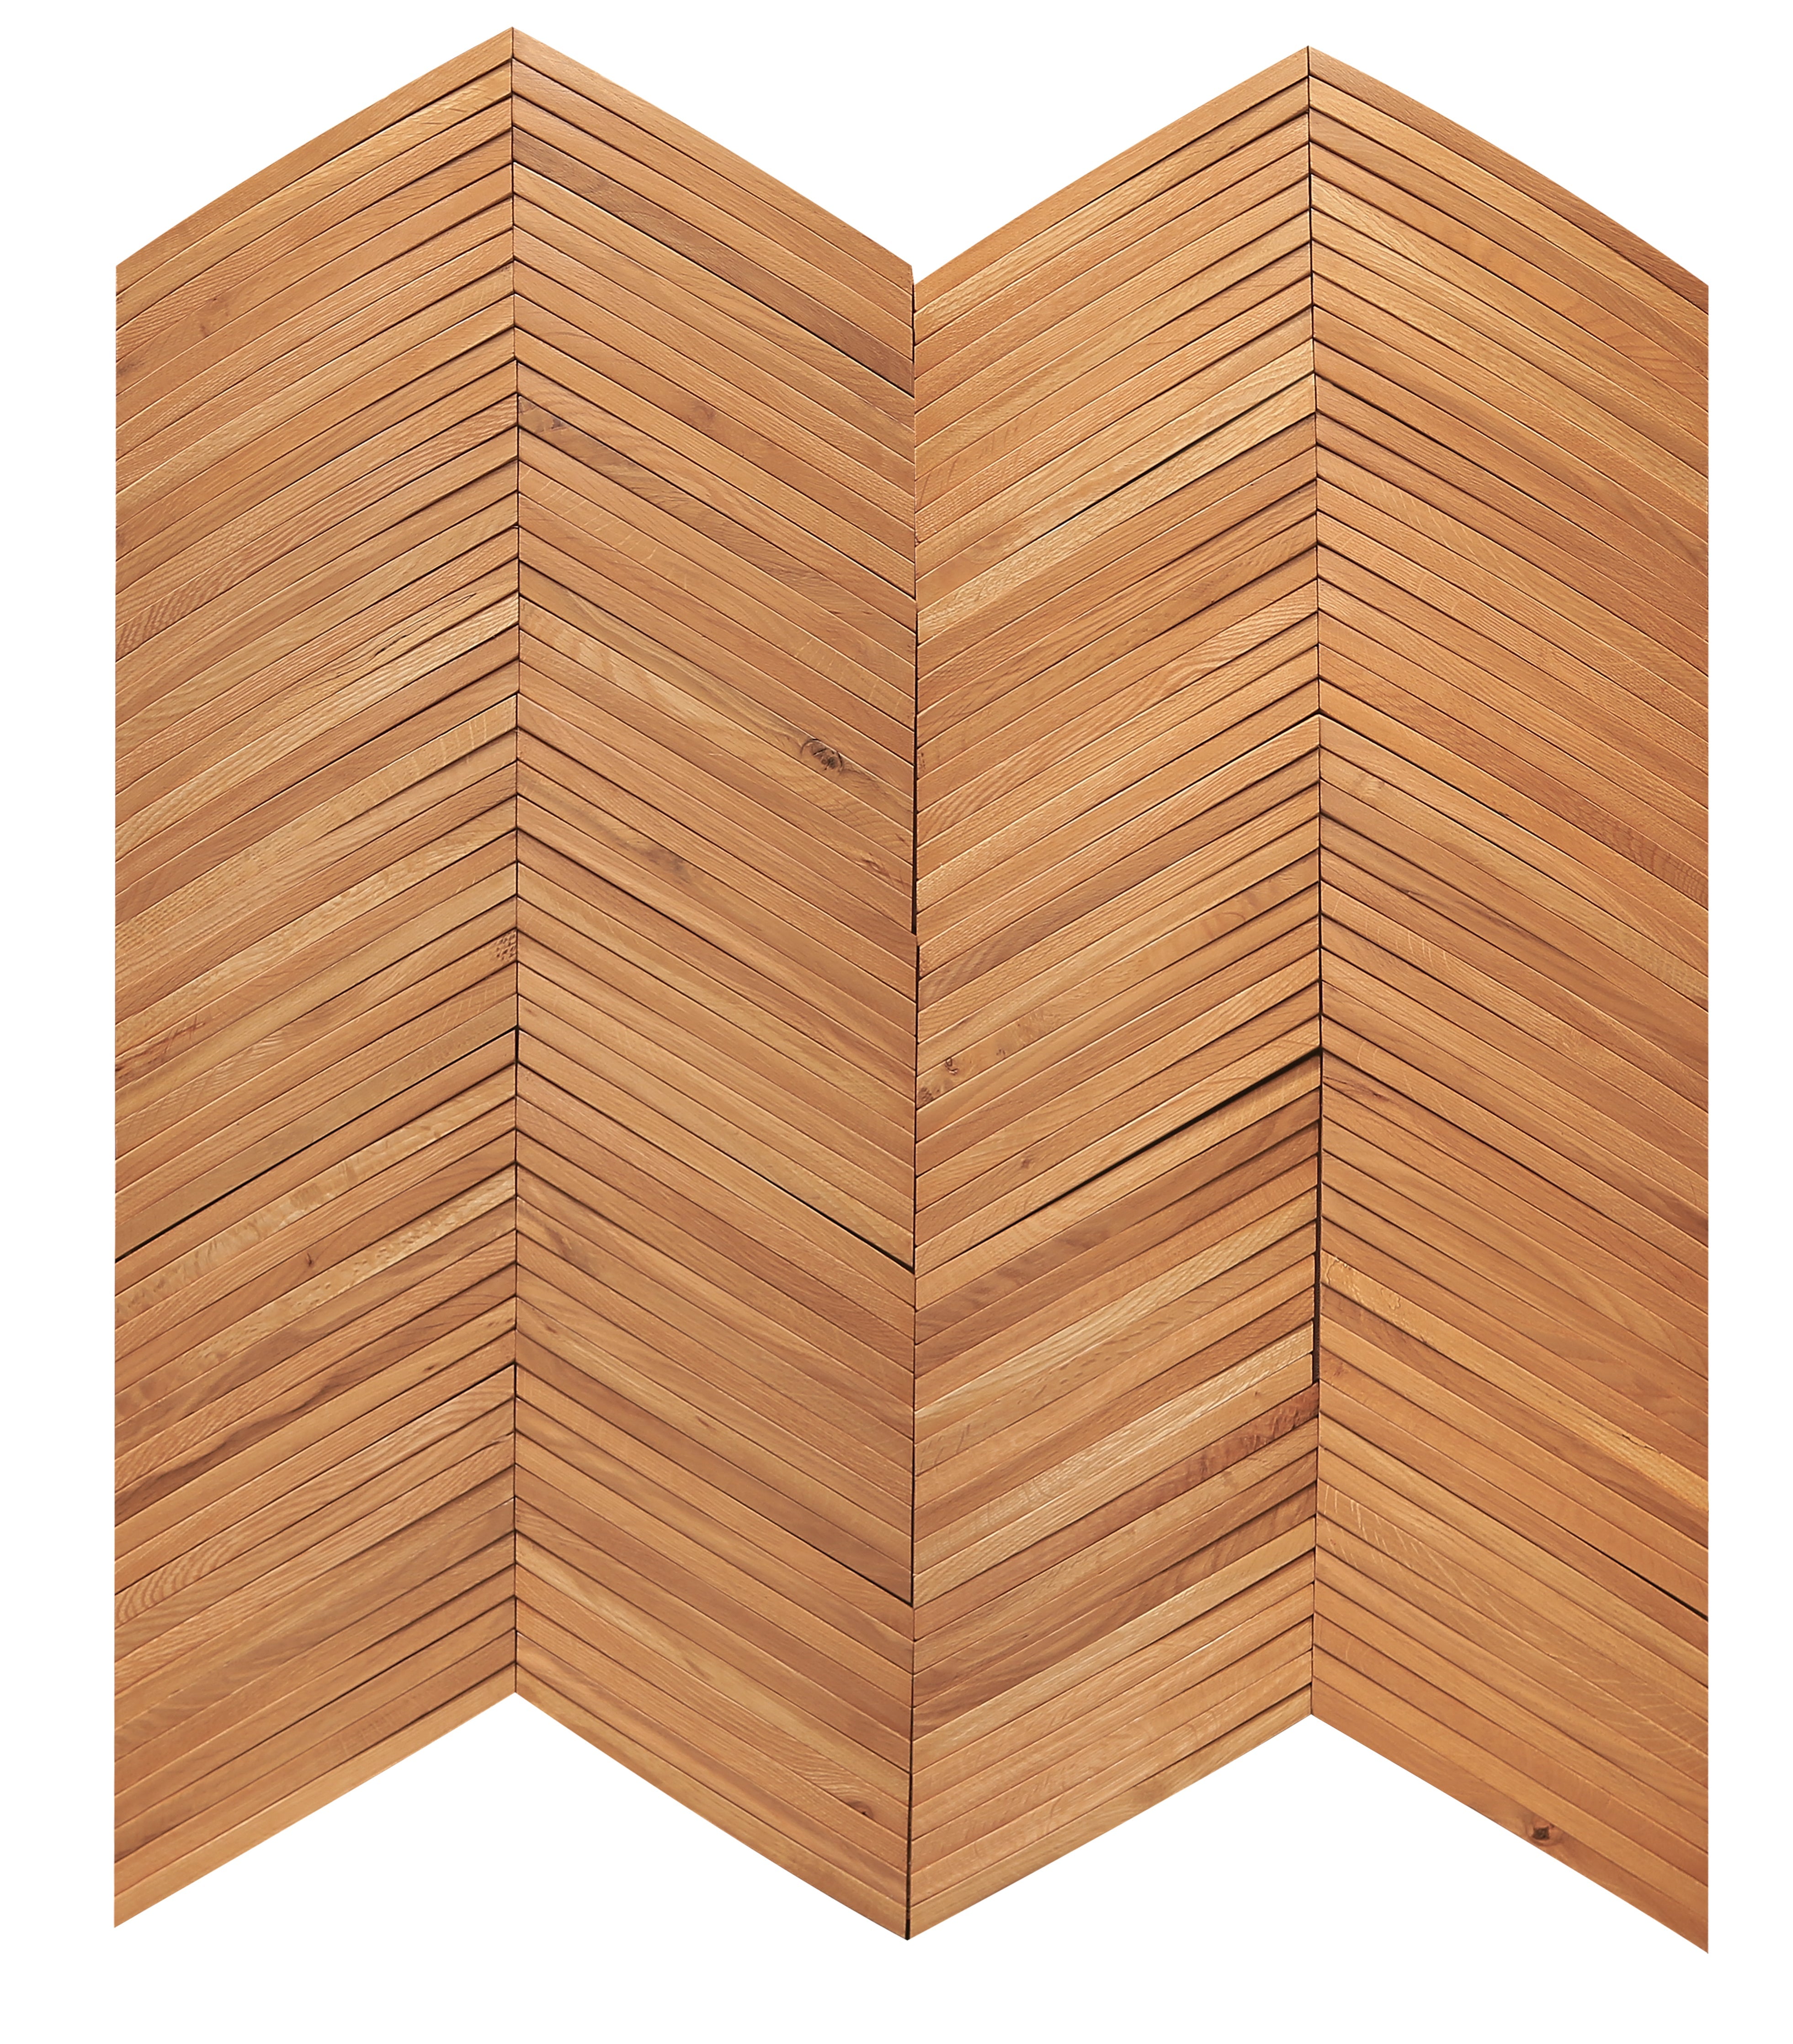 duchateau inceptiv ark chevron golden oak oak three dimensional wall natural wood panel conversion varnish for interior use distributed by surface group international